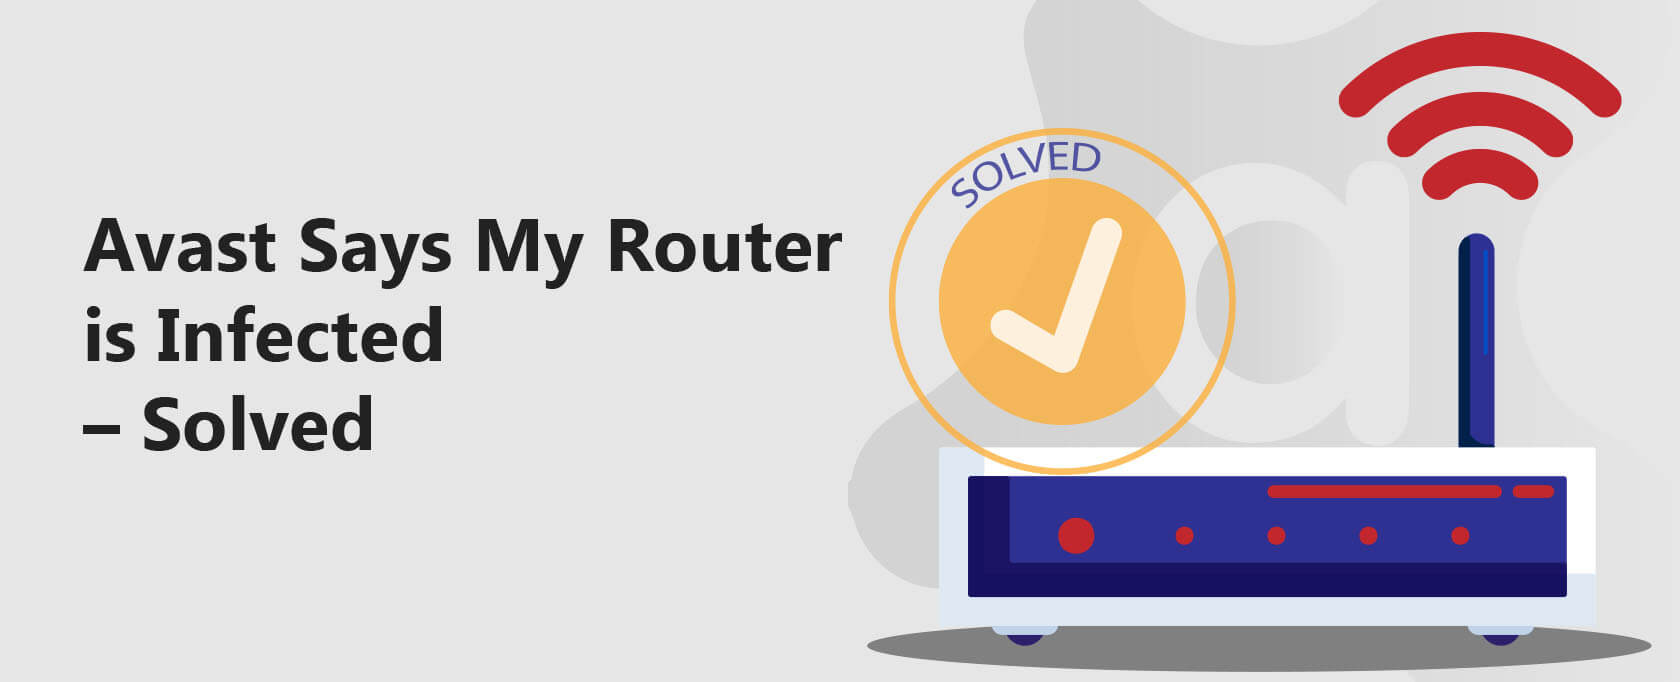 Fix Infected Avast Router